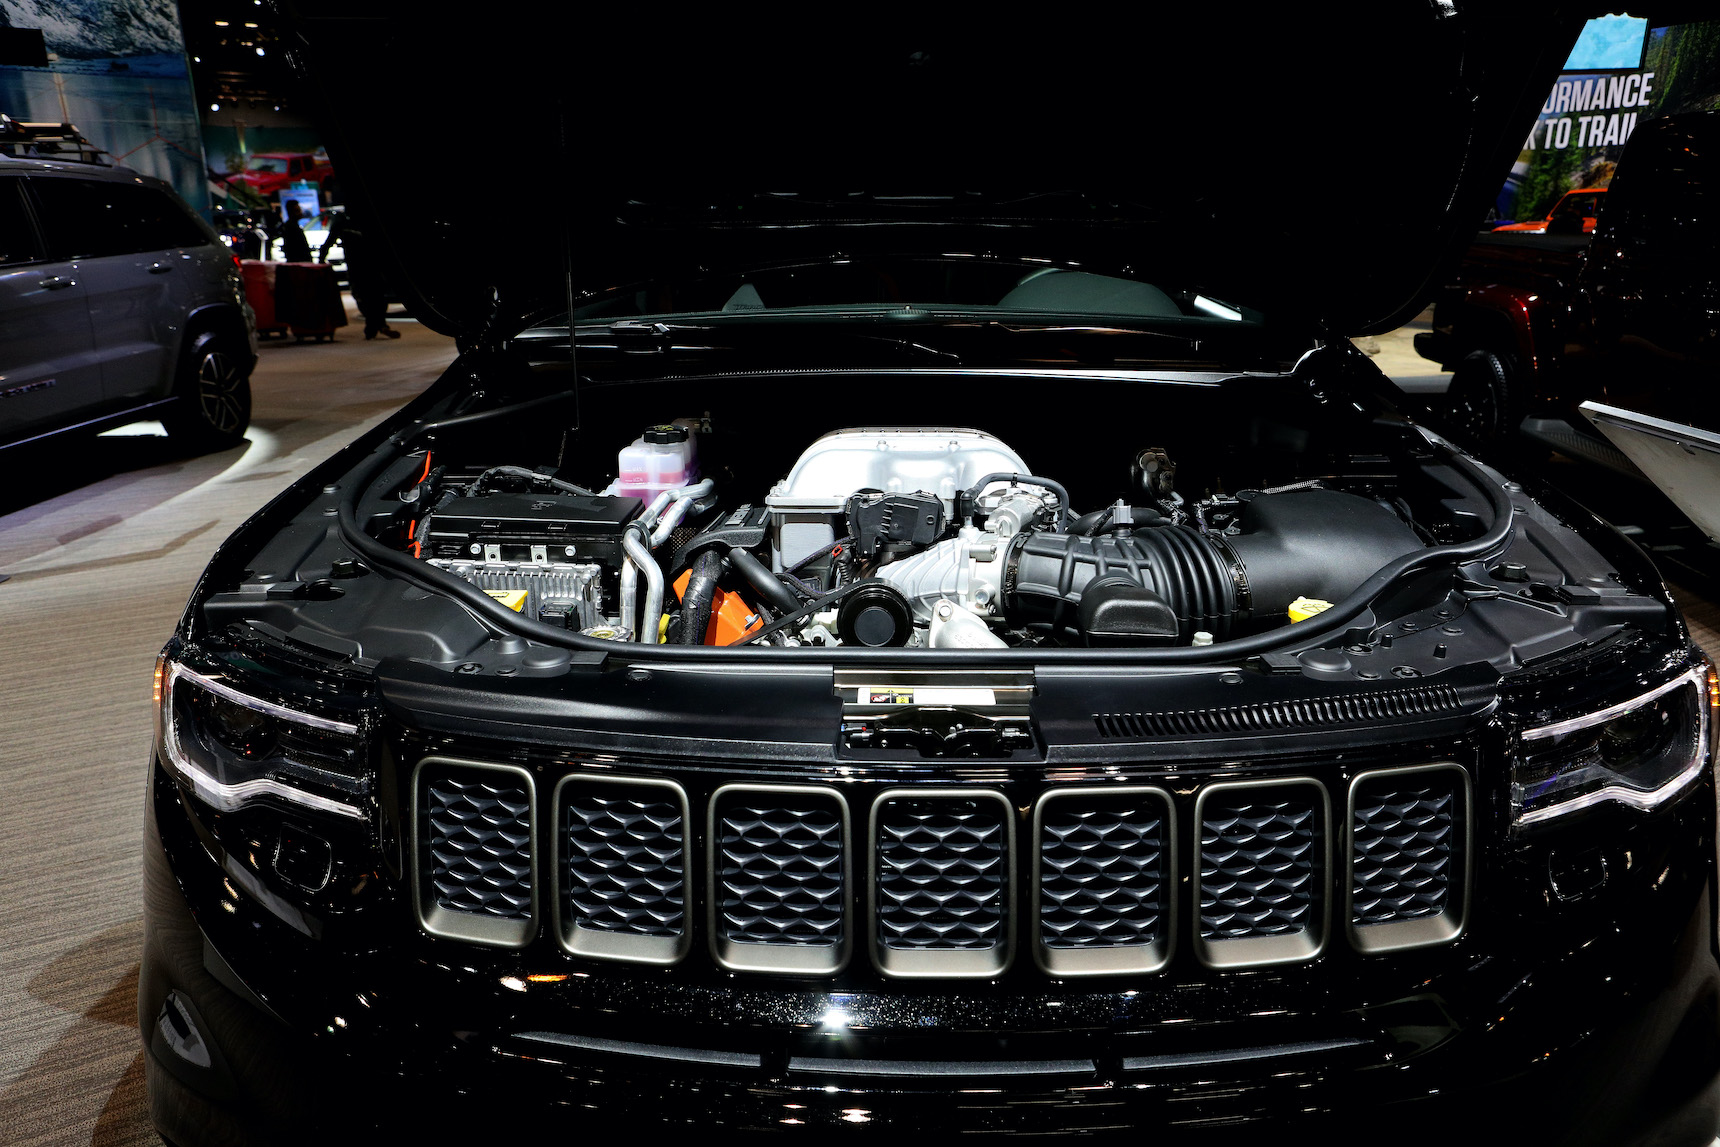 Under the hood of a black 2020 Grand Cherokee Trackhawk on display at the 112th Annual Chicago Auto Show